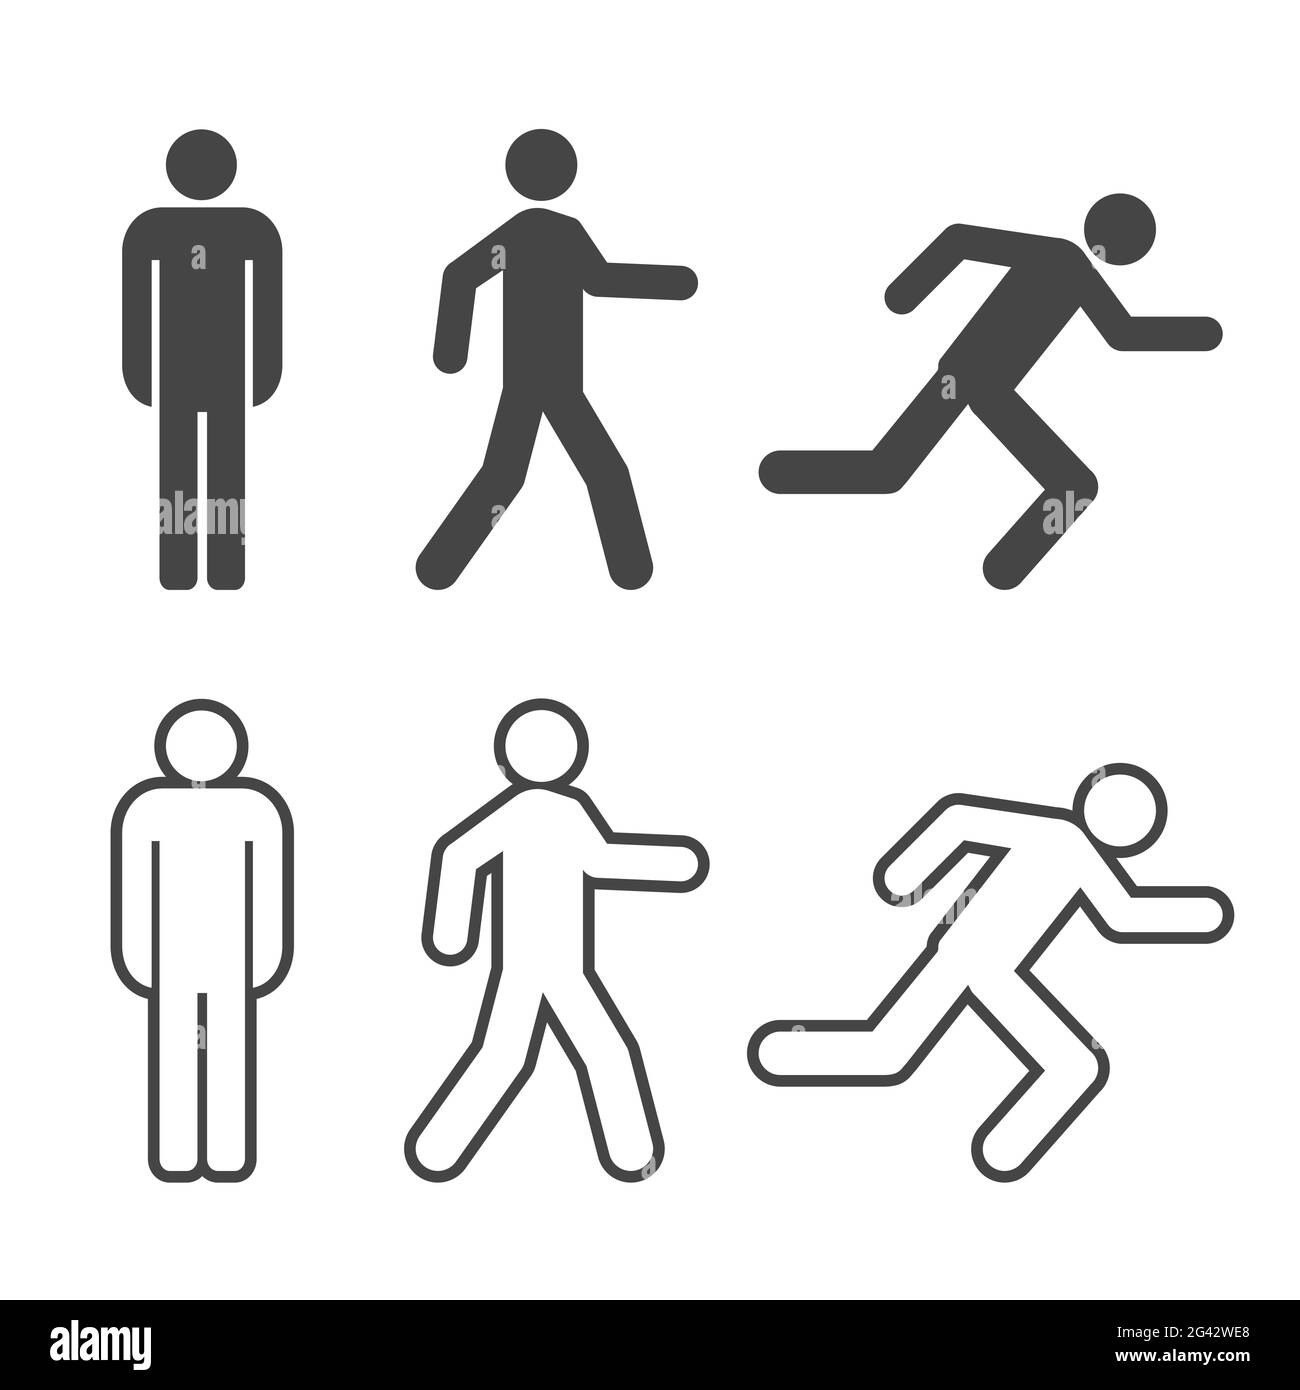 https://c8.alamy.com/comp/2G42WE8/man-stands-walk-and-run-silhouette-and-outline-icon-set-pedestrian-crossing-sign-people-in-motion-stick-figure-simple-icons-illustration-2G42WE8.jpg